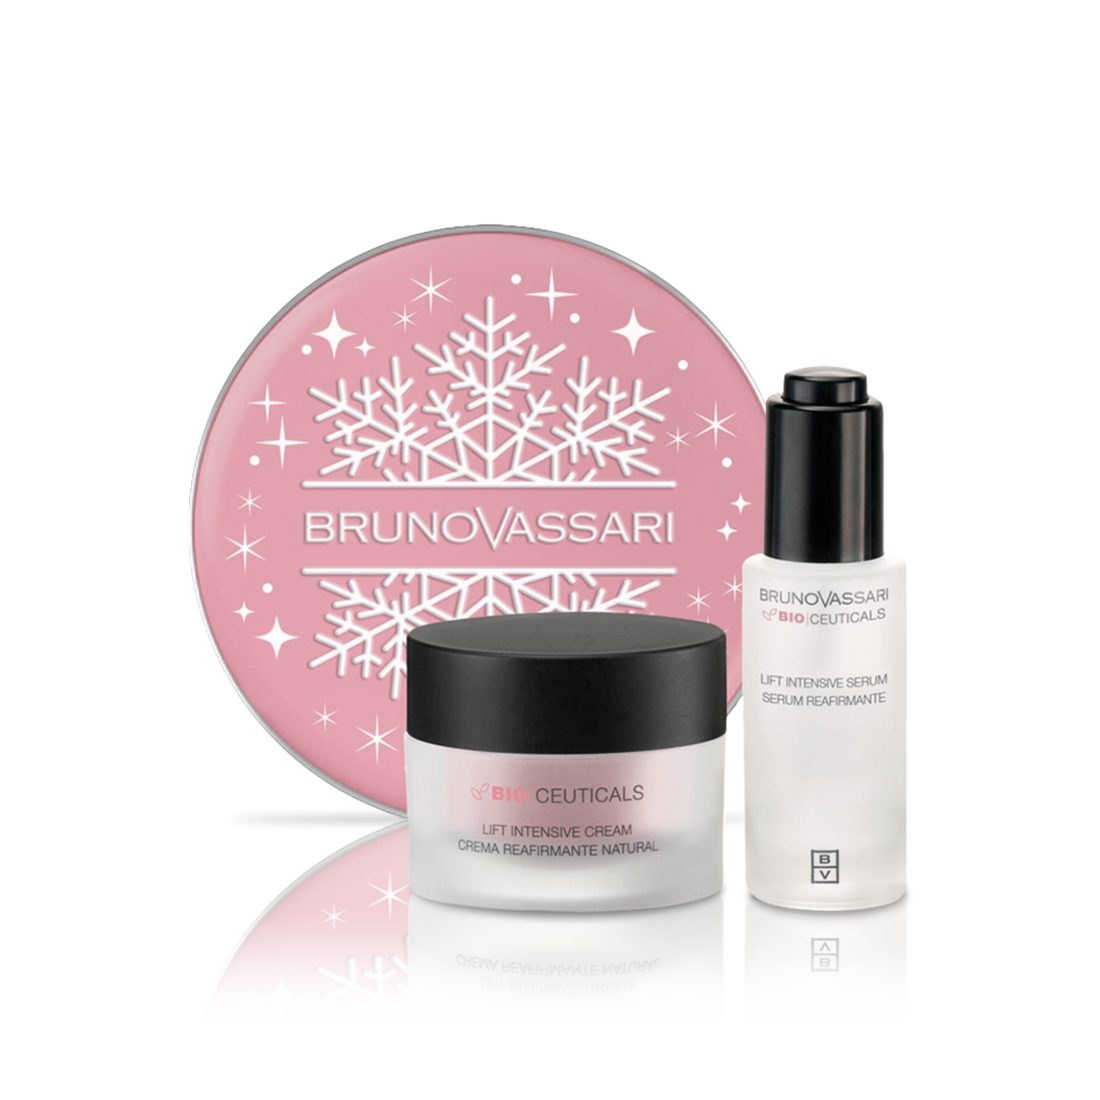 Bioceuticals Holiday Gift Set